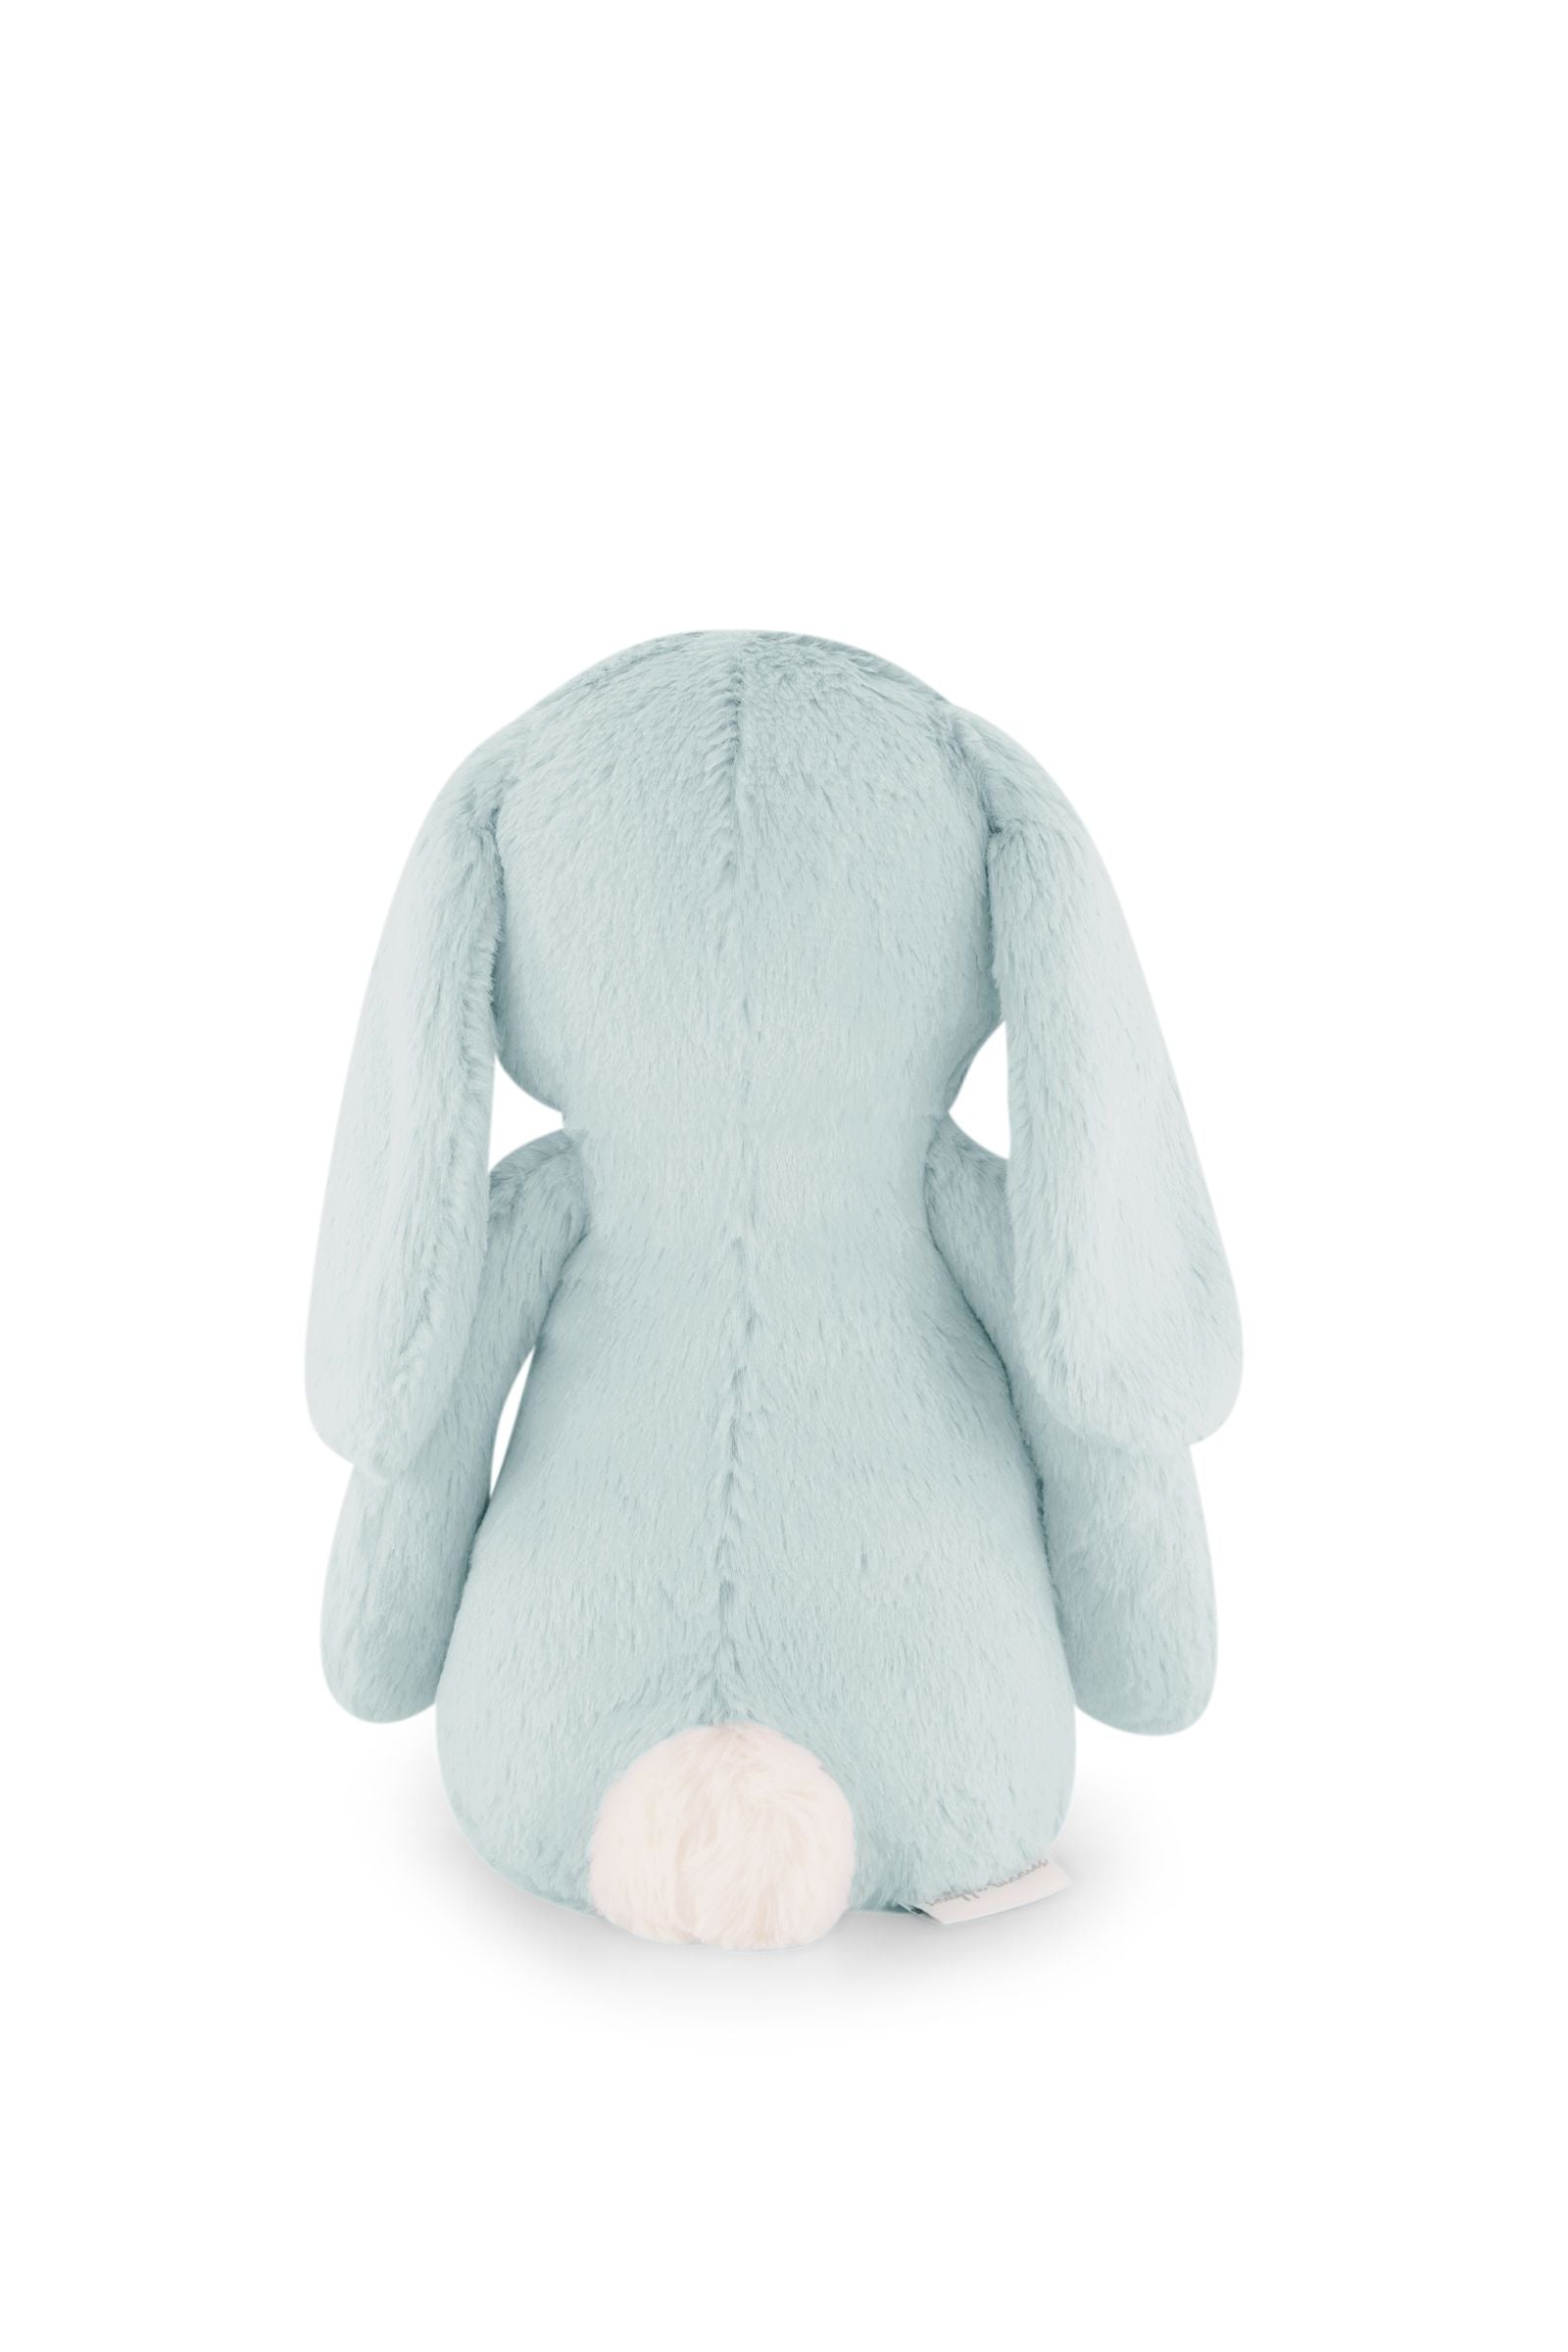 Snuggle Bunnies - Penelope the Bunny - Sprout 30cm-Toys-Jamie Kay-The Bay Room